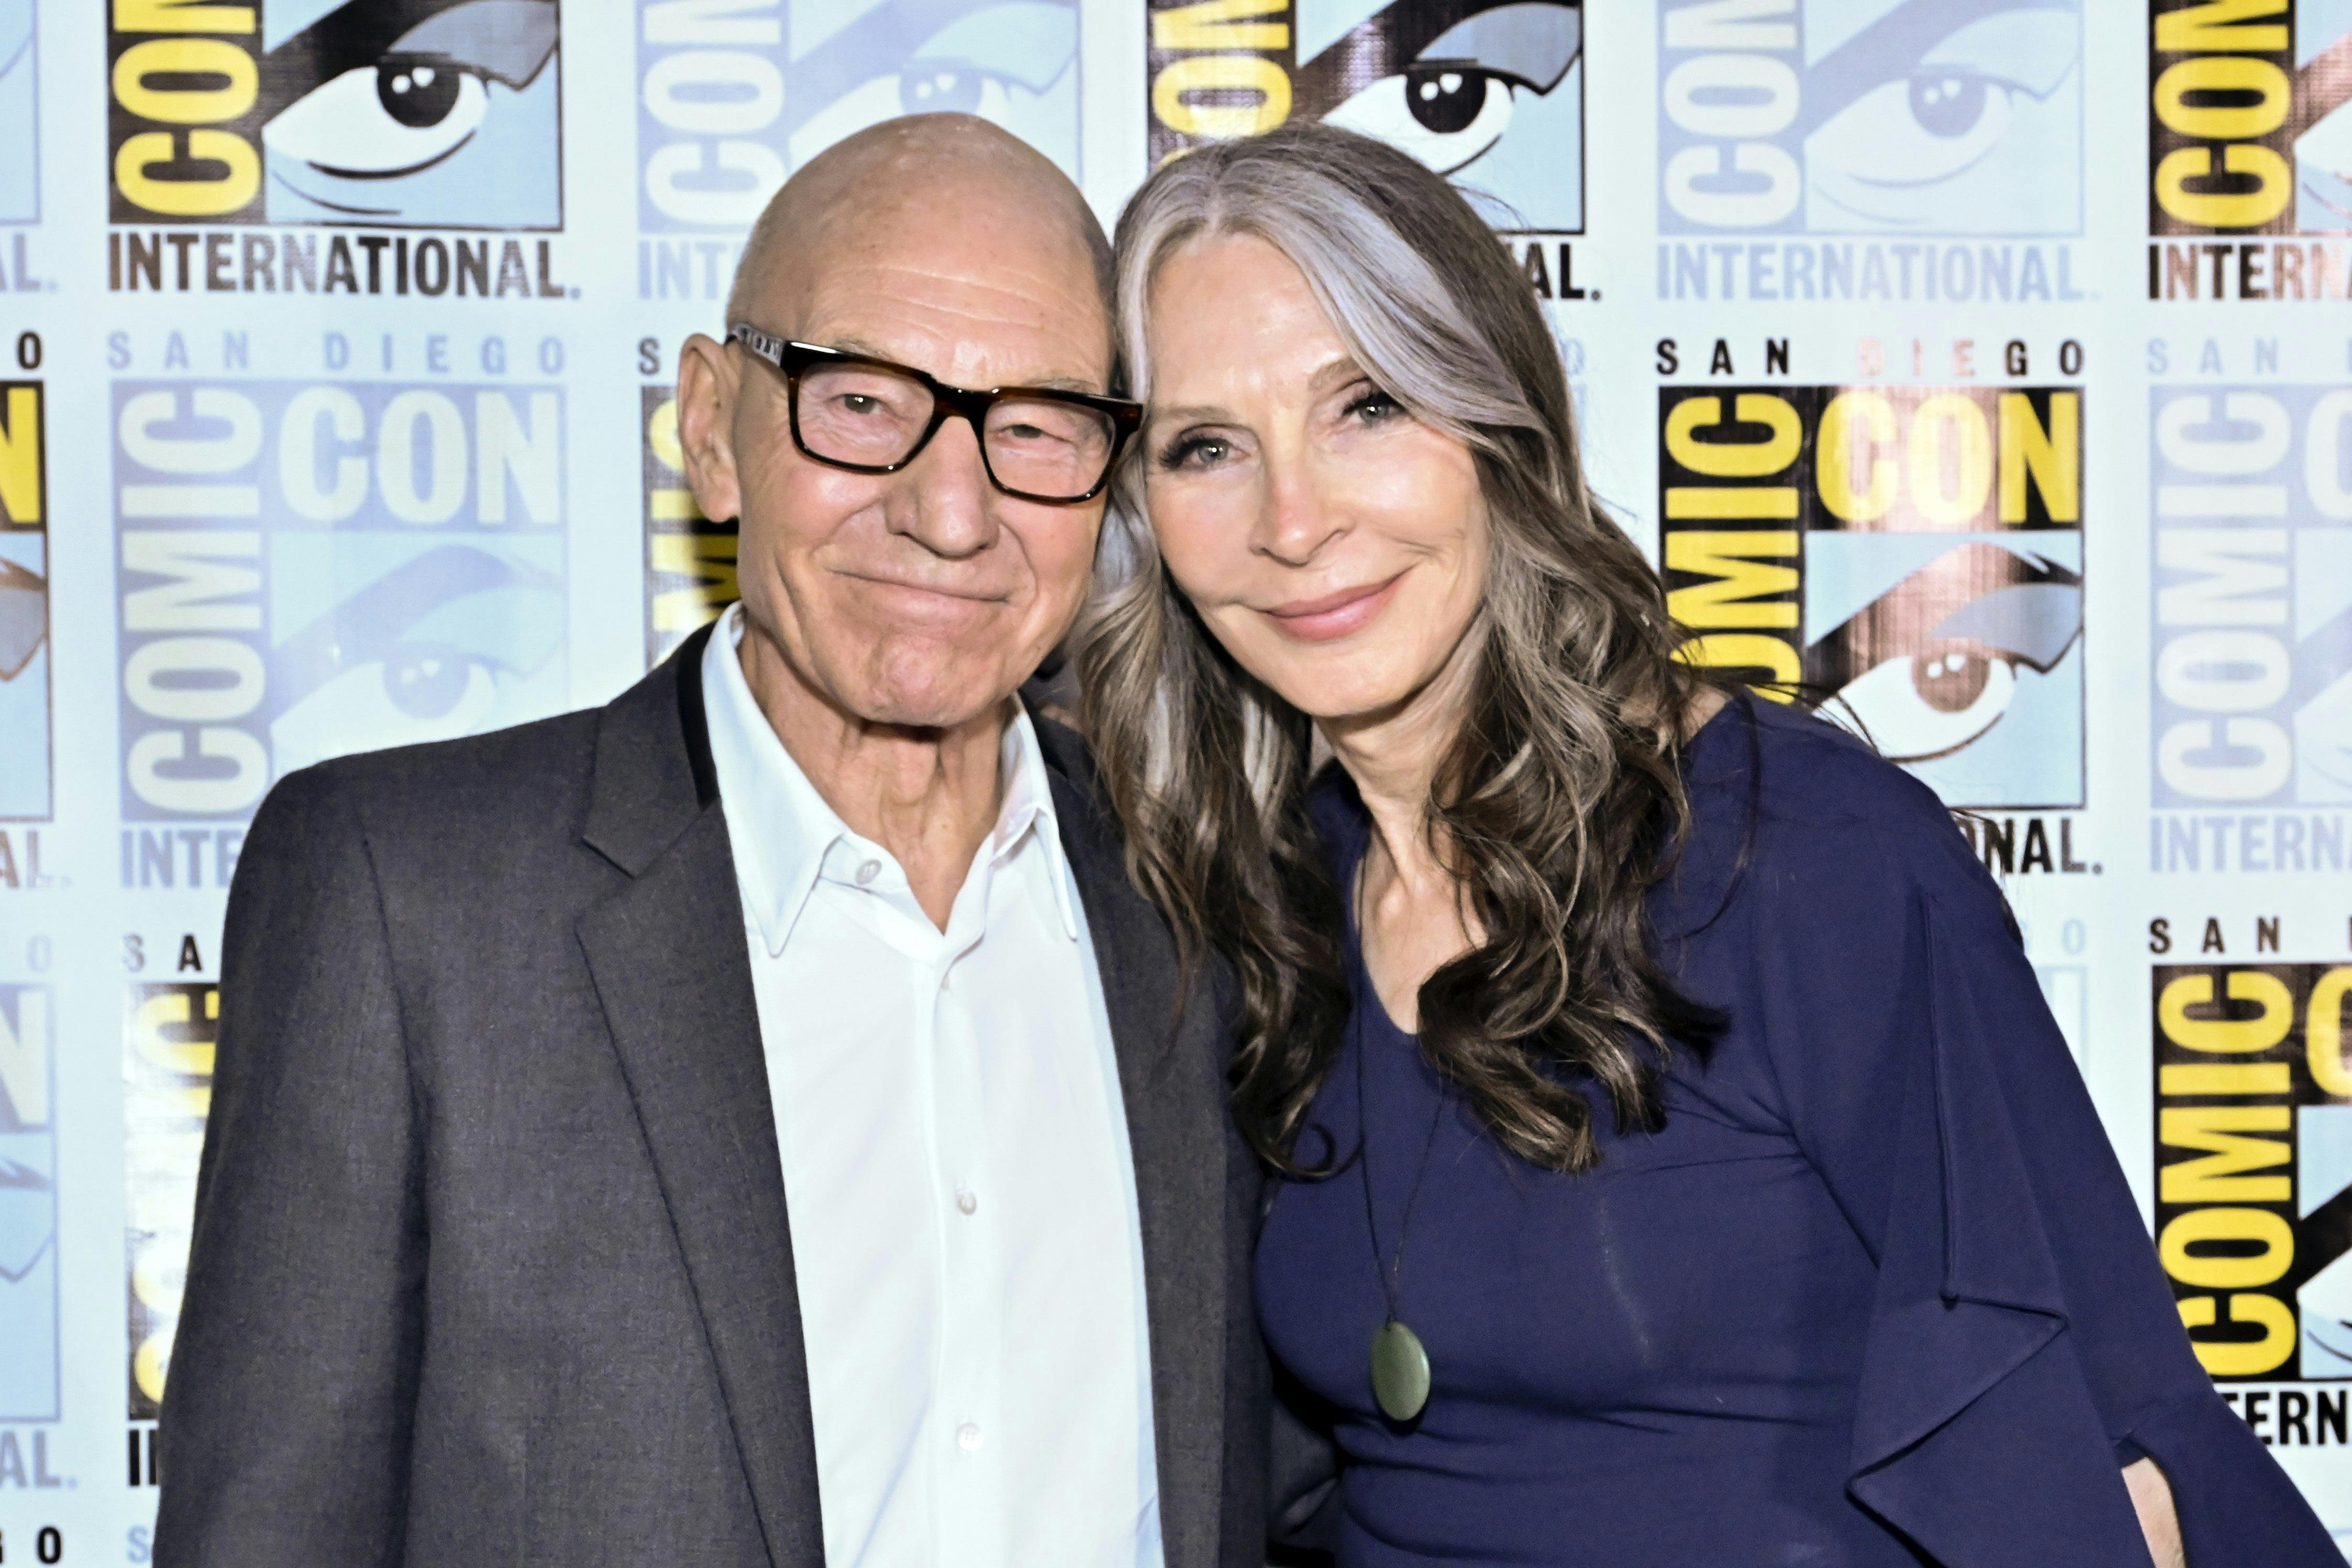 Sir Patrick Stewart and Gates McFadden pose for a photo after the Star Trek: Picard panel.